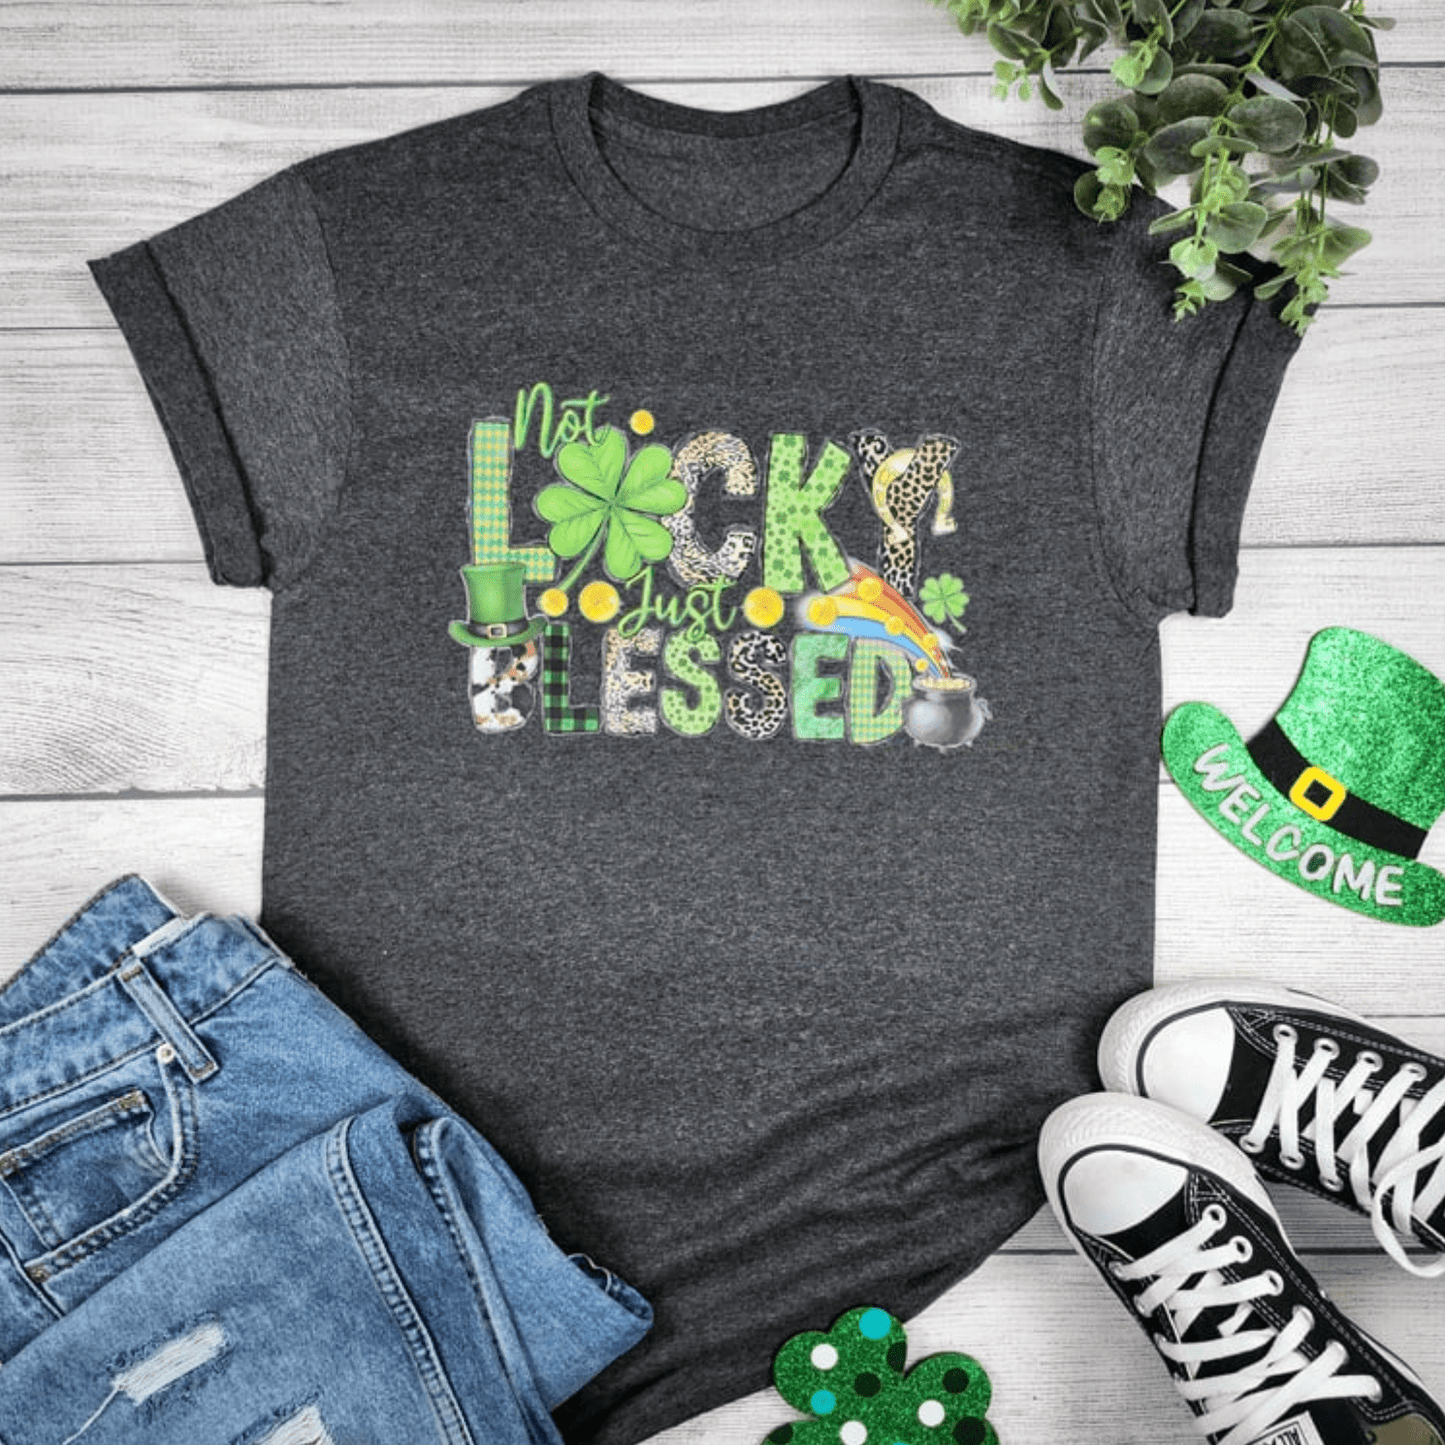 Envy Stylz Boutique Women - Apparel - Shirts - T-Shirts Not Lucky Just Blessed Graphic Tee